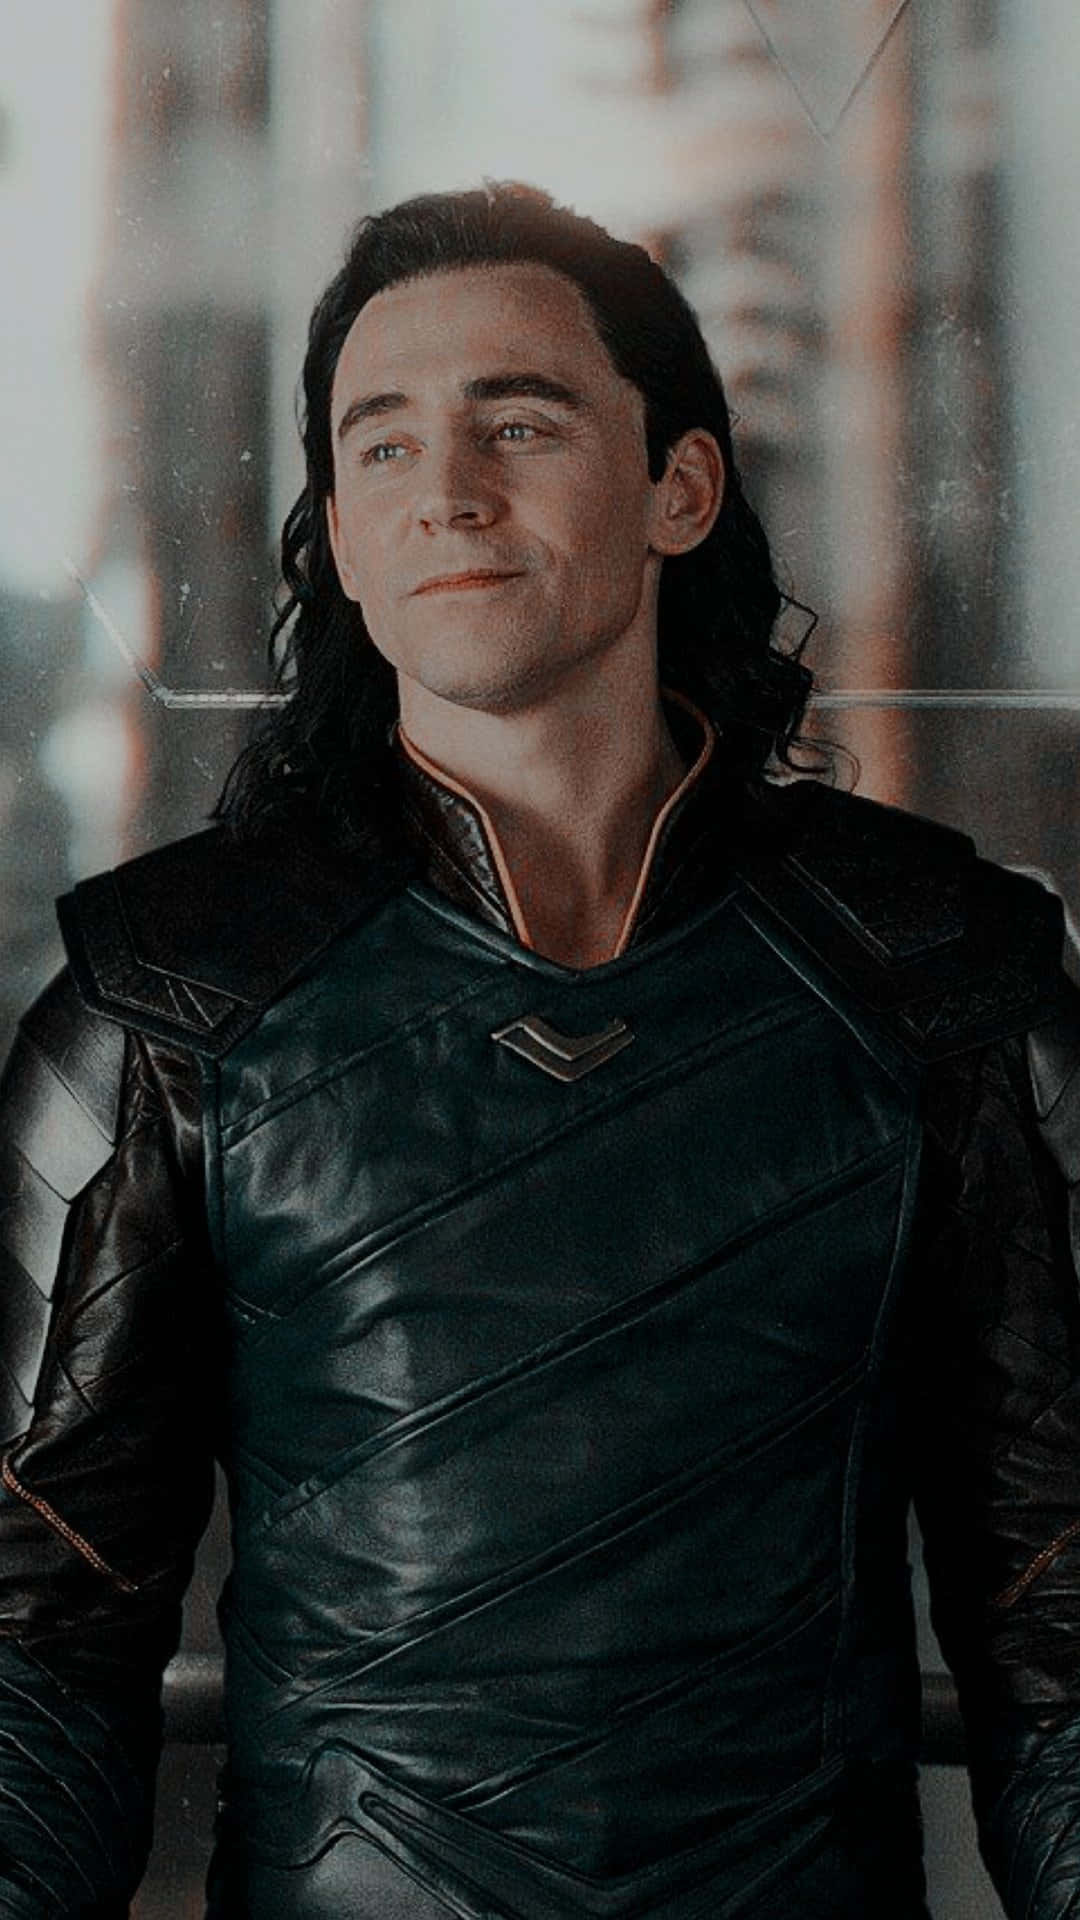 The Cunning and Mischievous Loki